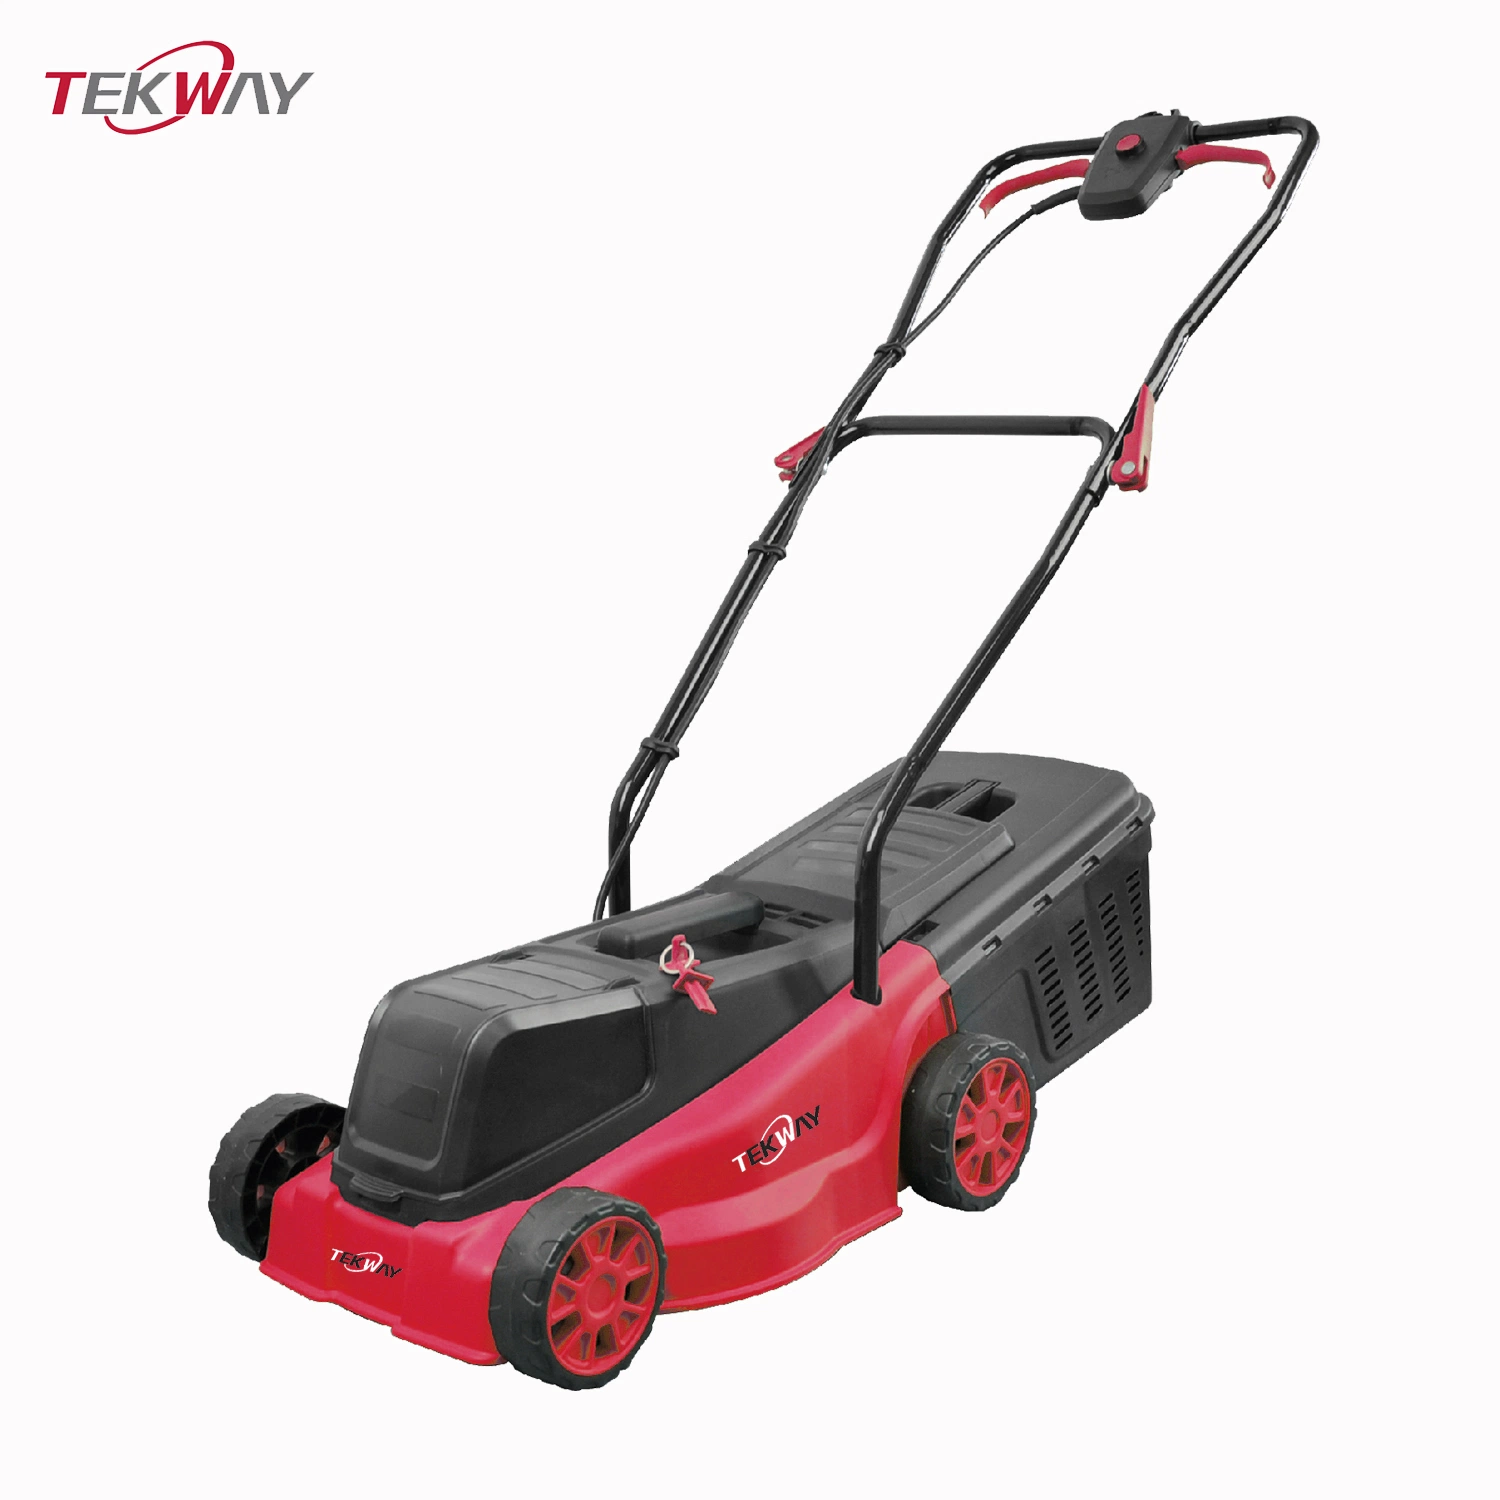 Factory Sale 32cm Lawn Mower with 18V Lithium Battery Grass Cutter for Landscape